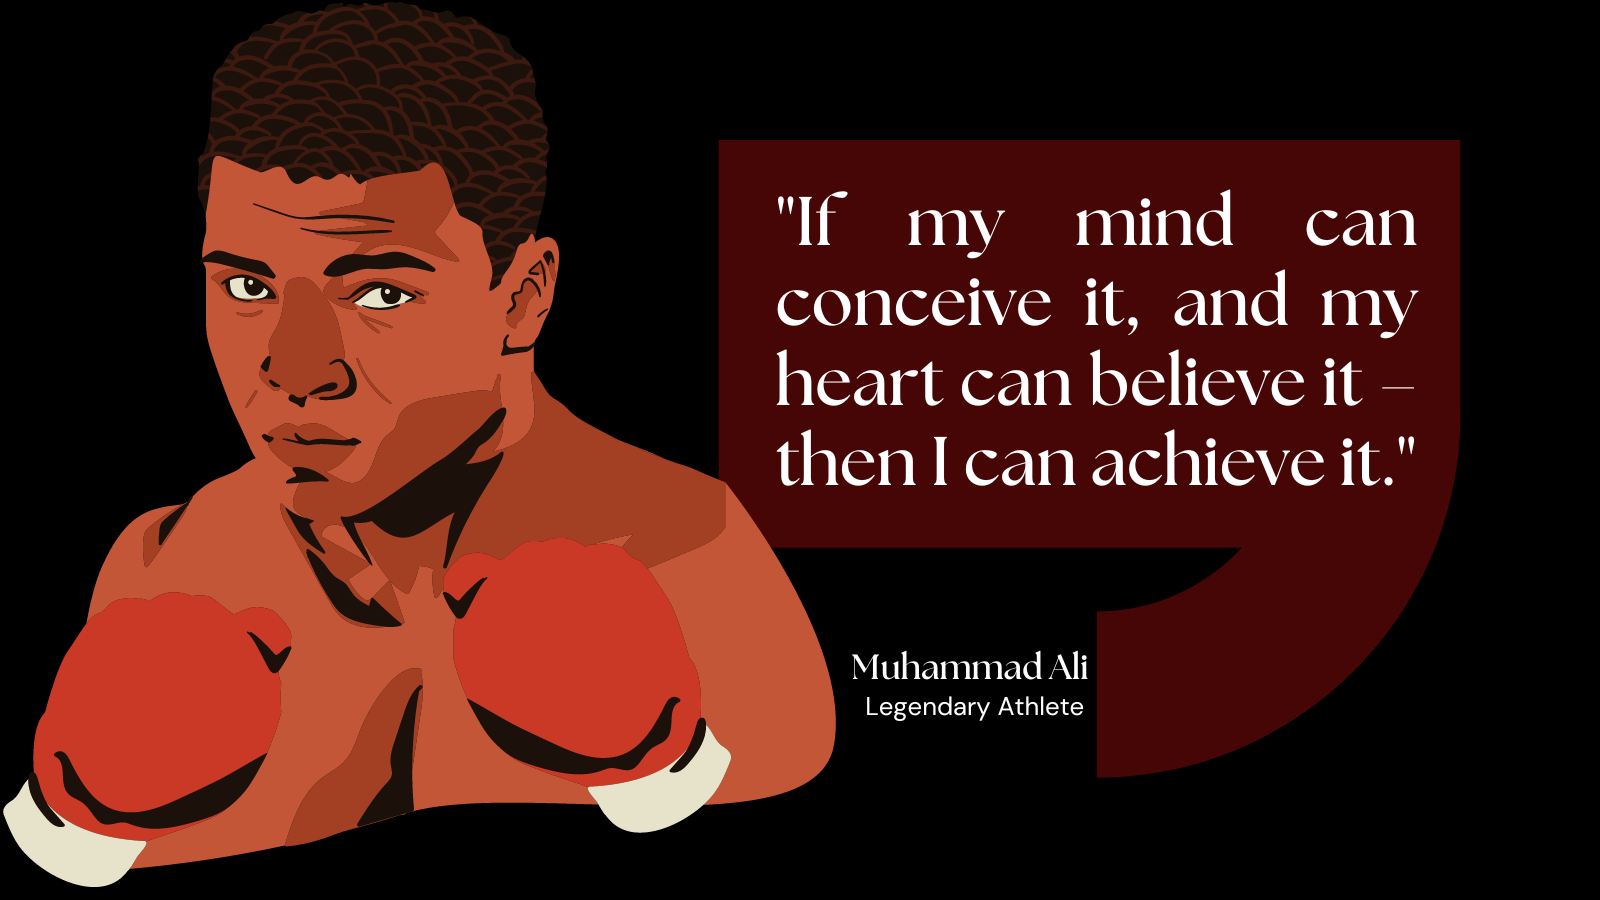 "If my mind can conceive it, and my heart can believe it – then I can achieve it."